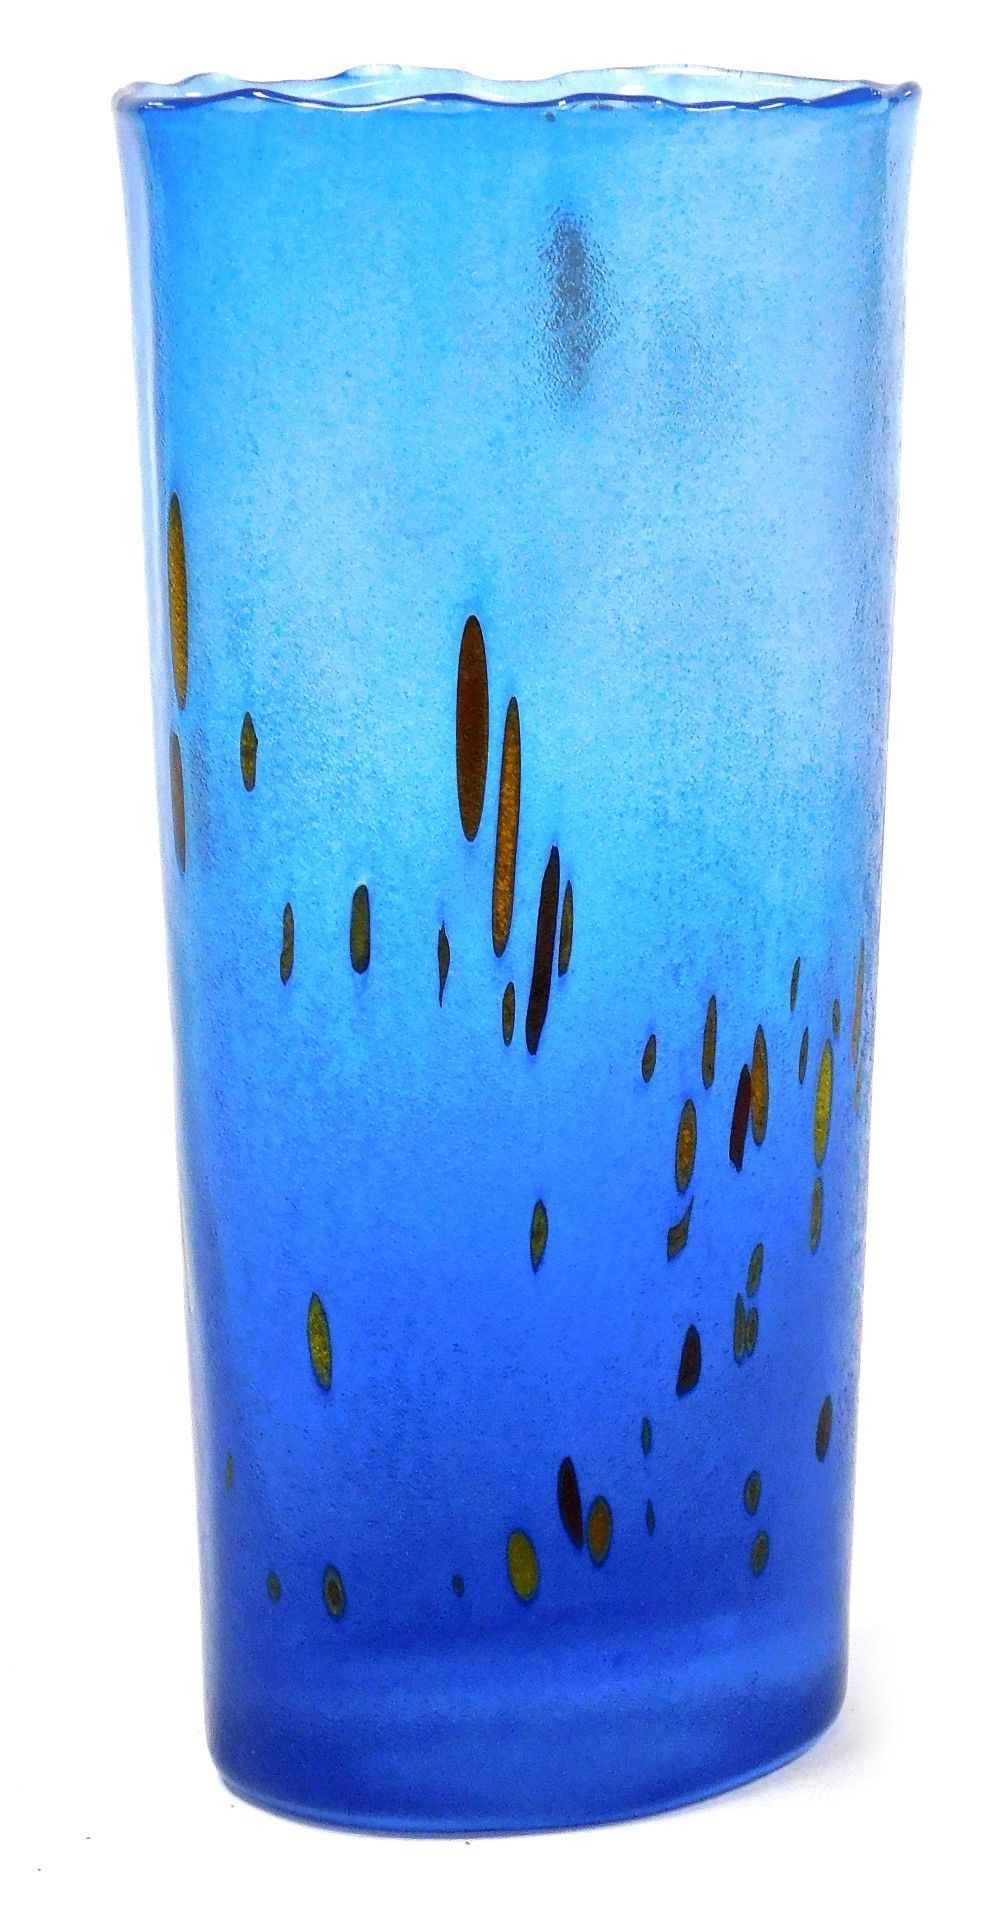 A Kosta Boda blue glass vase, of compressed cylindrical form, with flashes of browns and yellows, si